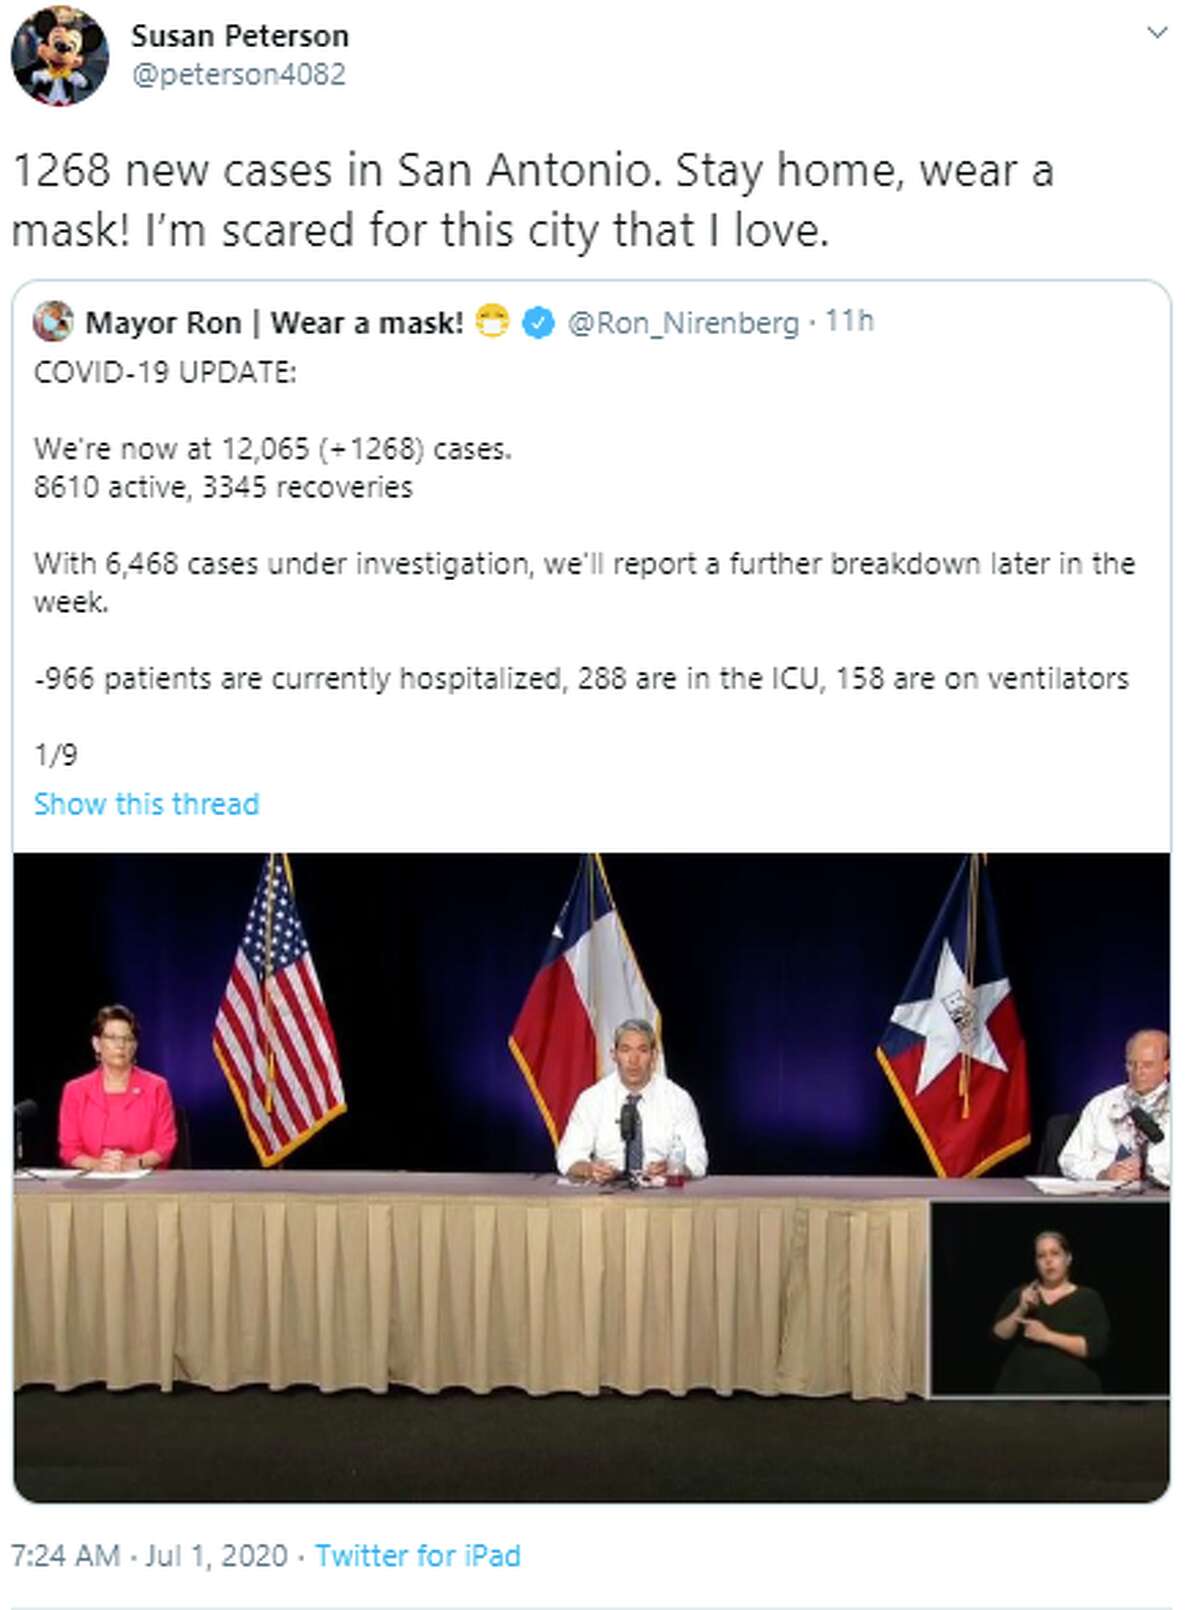 @peterson4082: 1268 new cases in San Antonio. Stay home, wear a mask! I’m scared for this city that I love.